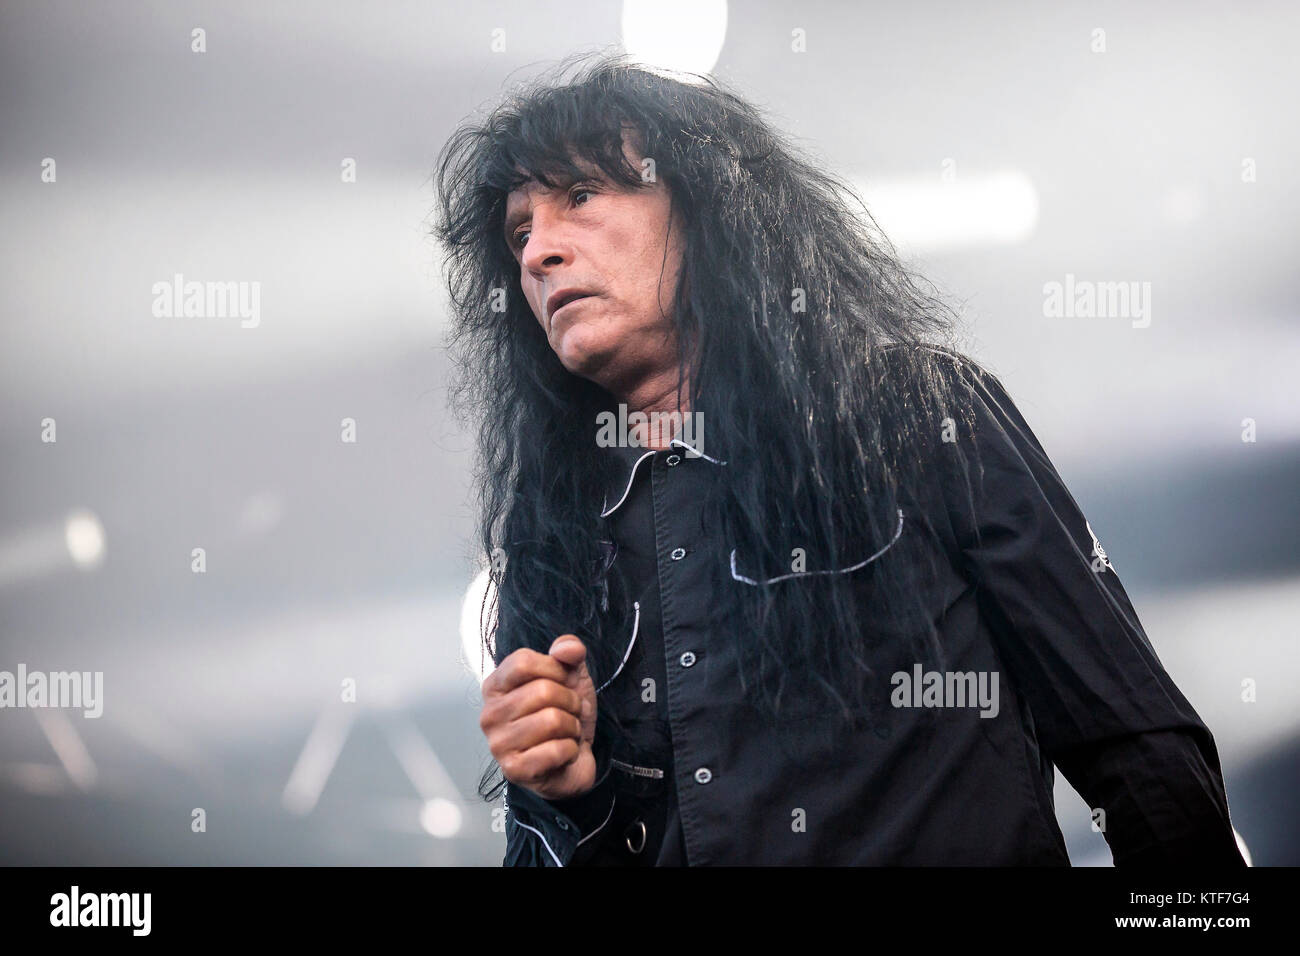 The American thrash metal band Anthrax performs a live concert at the Swedish music festival Sweden Rock Festival 2016. Here vocalist Joey Belladonna is seen live on stage. Sweden, 11/06 2016. Stock Photo